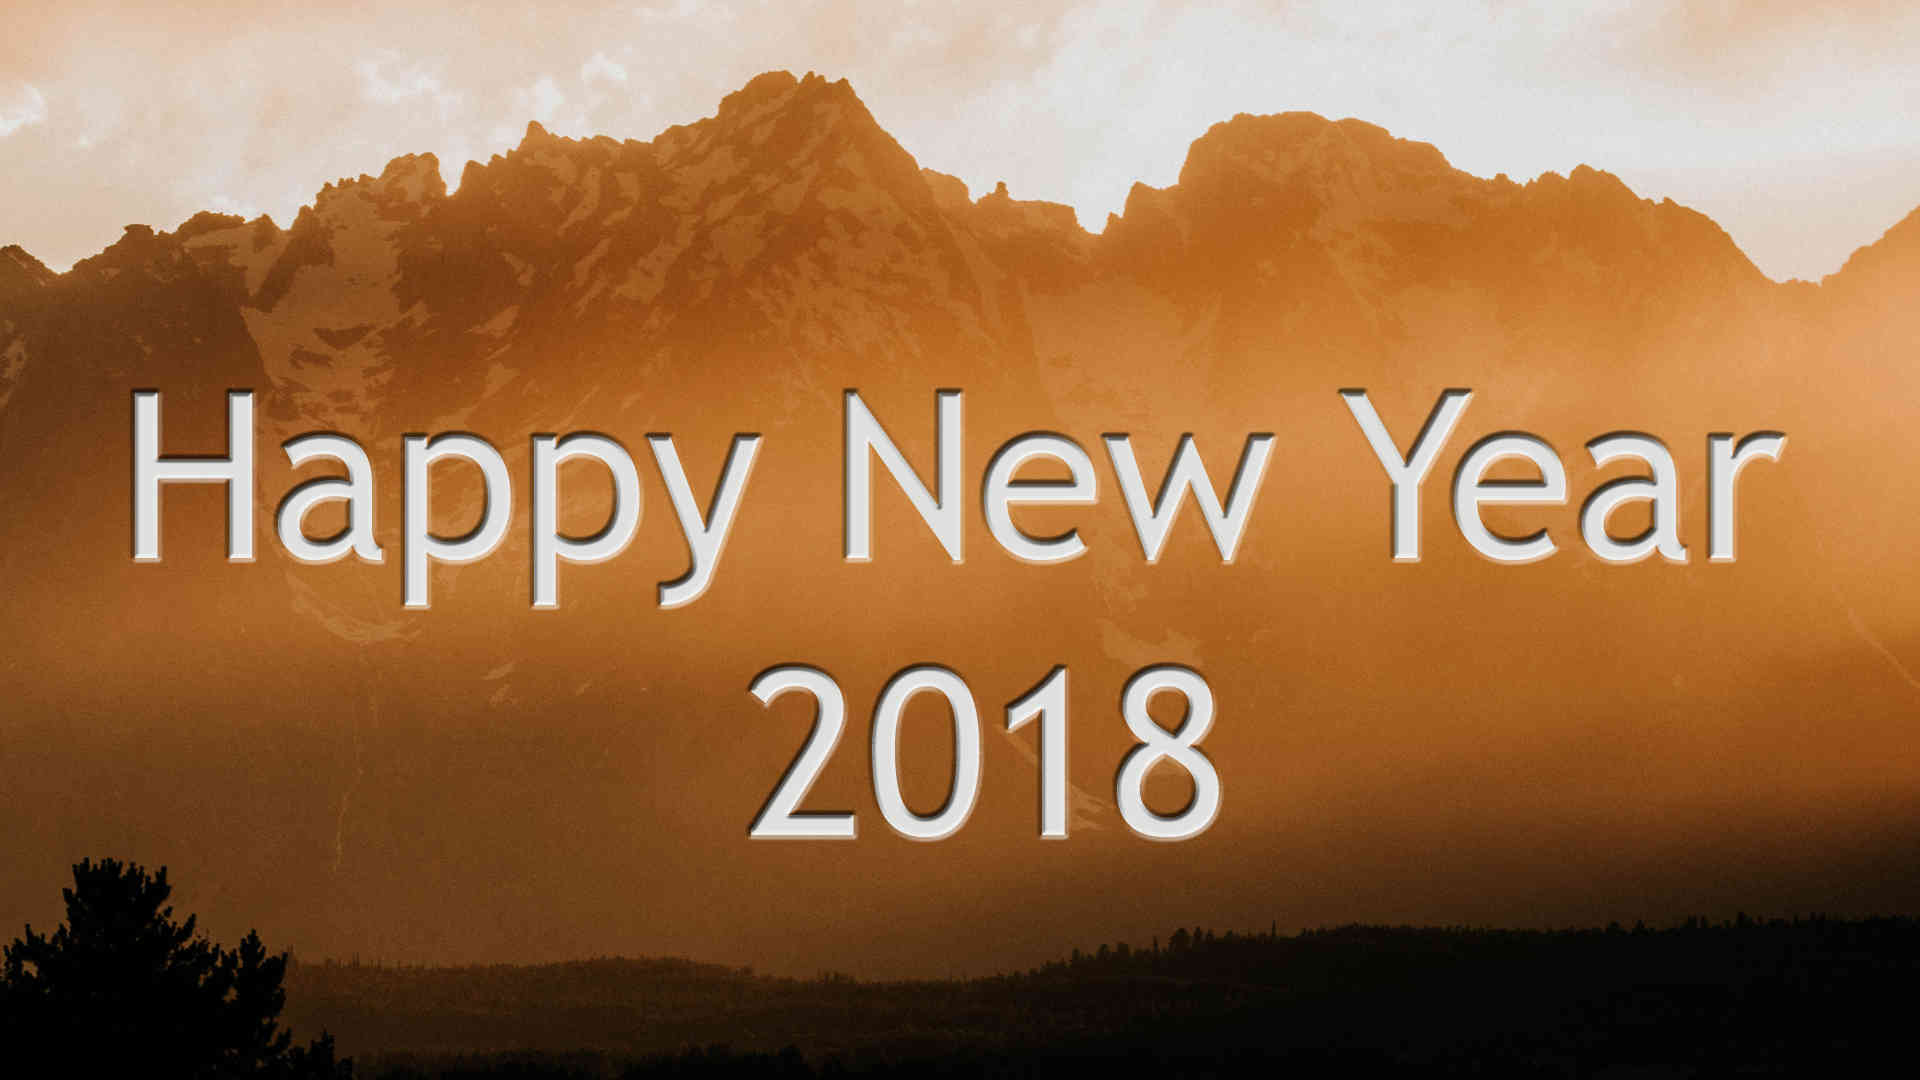 Happy New Year Image With